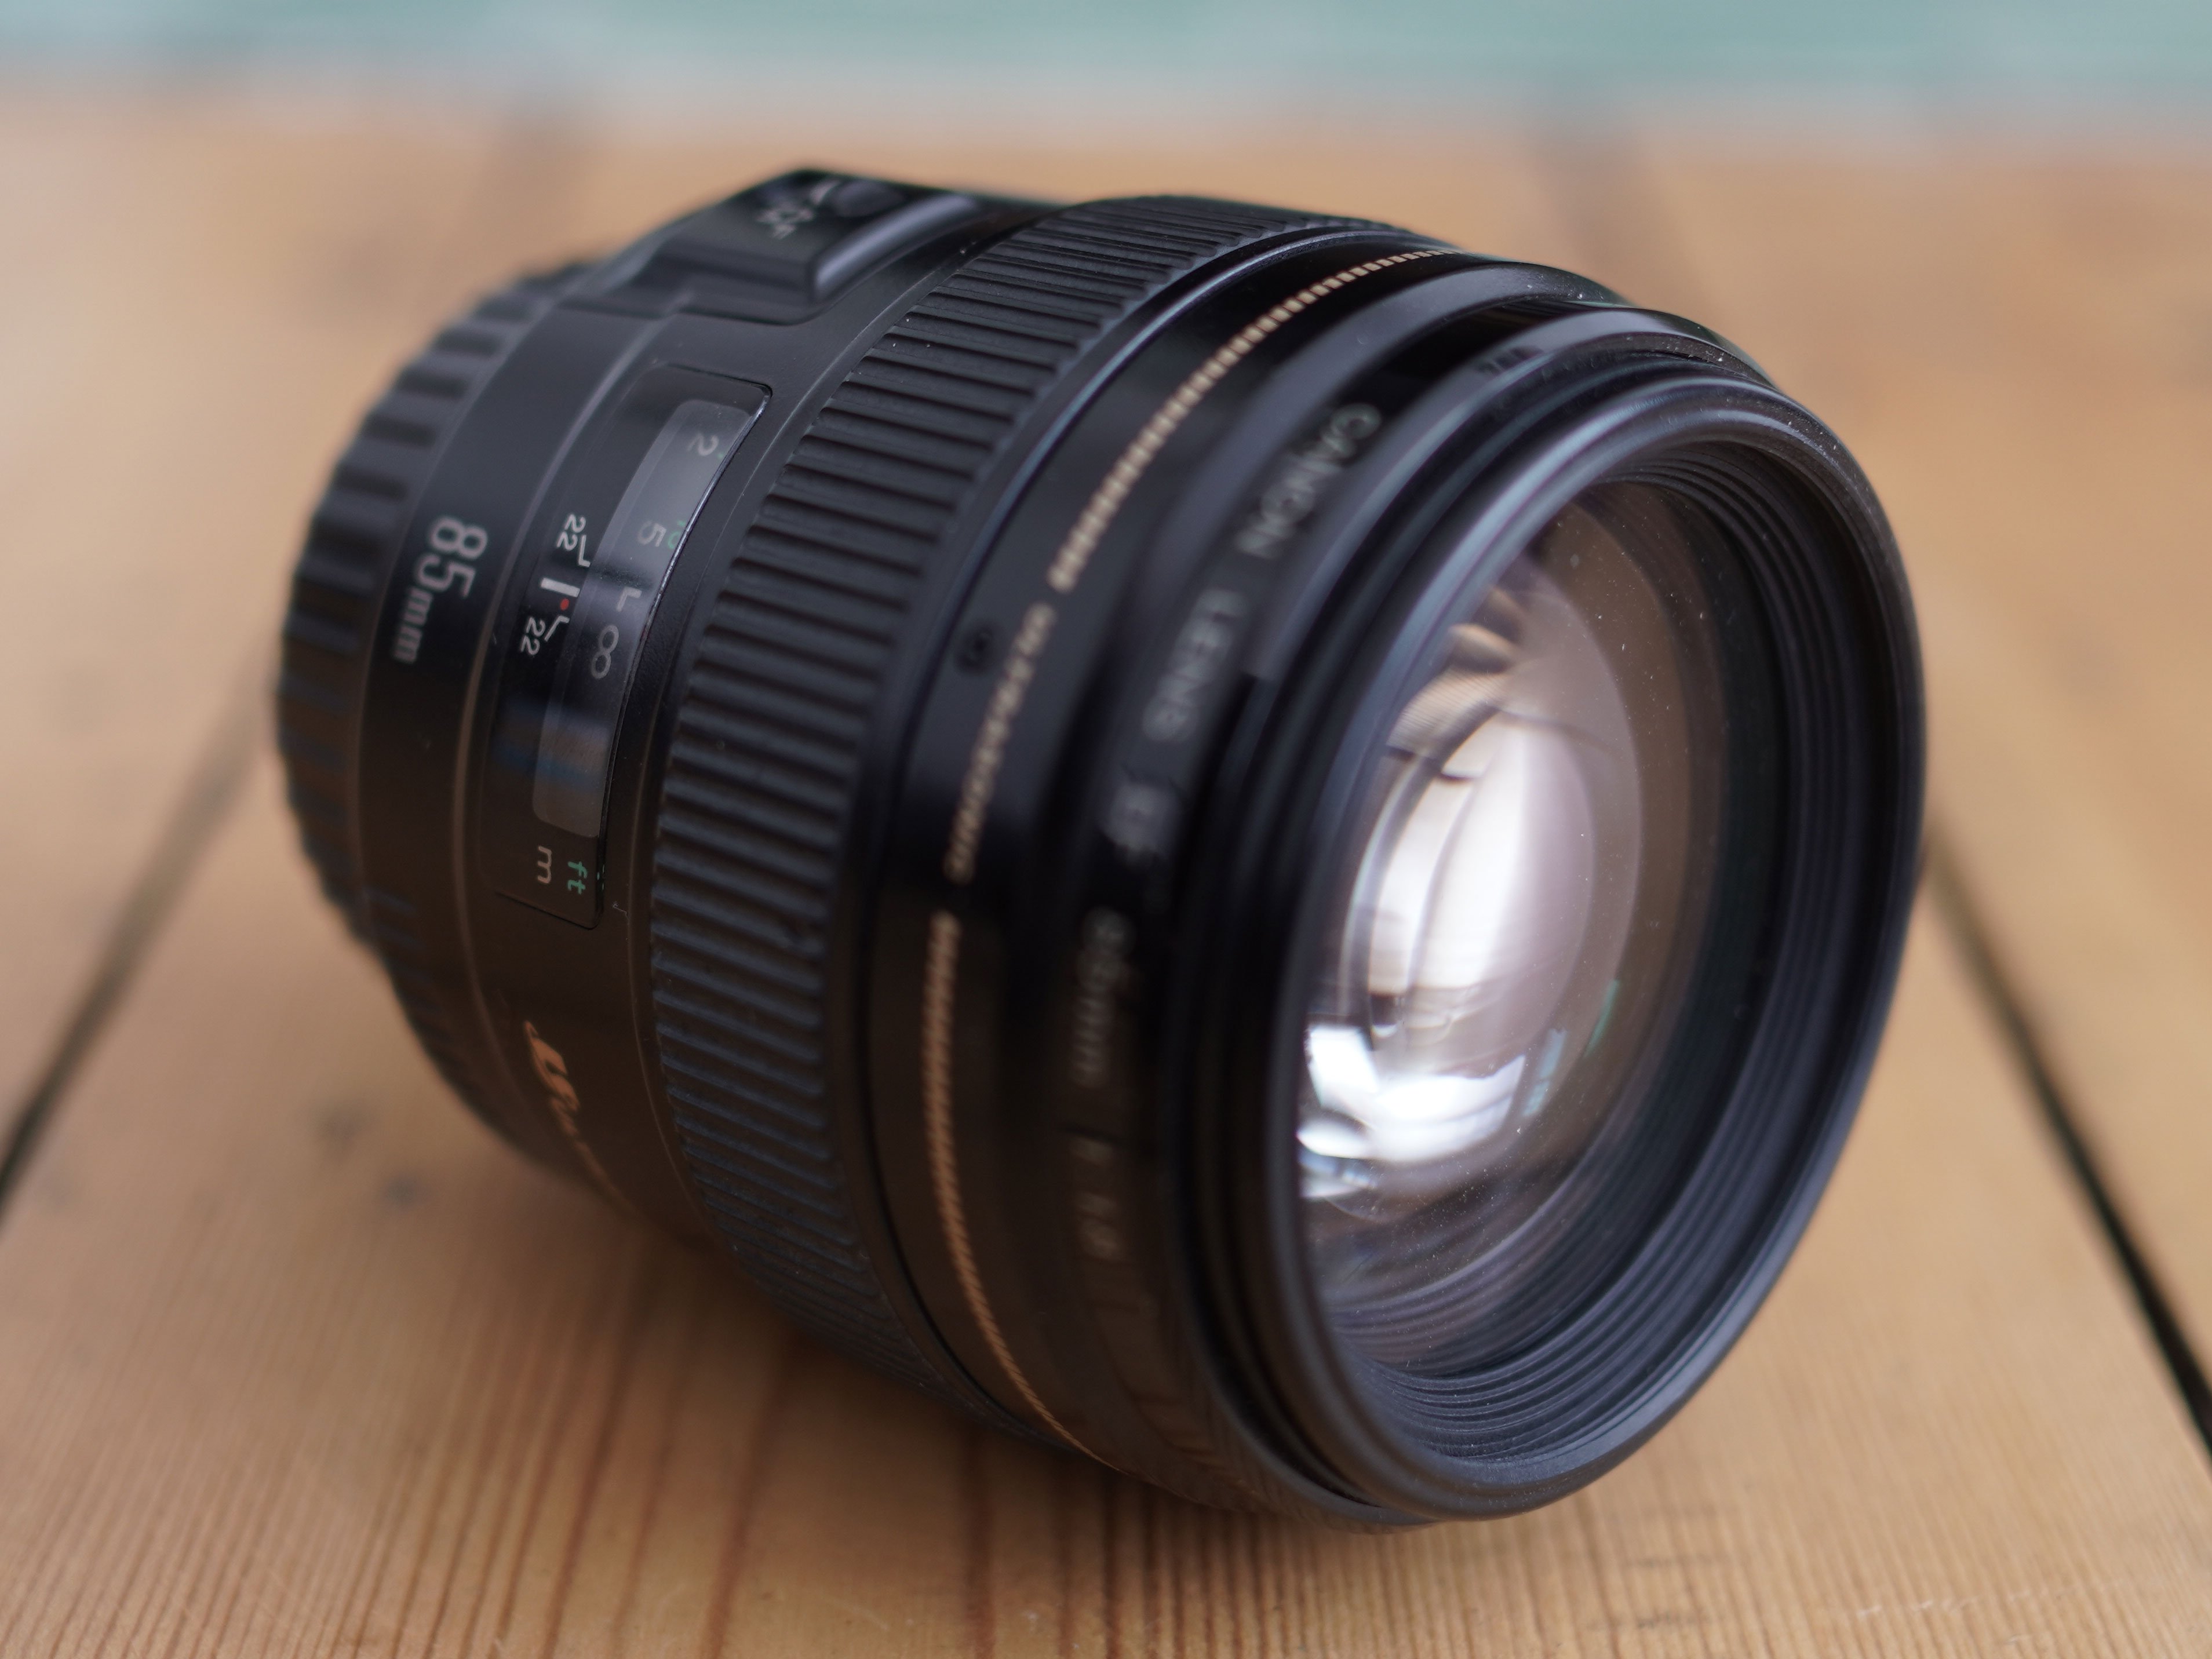 Canon EF 85mm f1.8 USM | Cameralabs